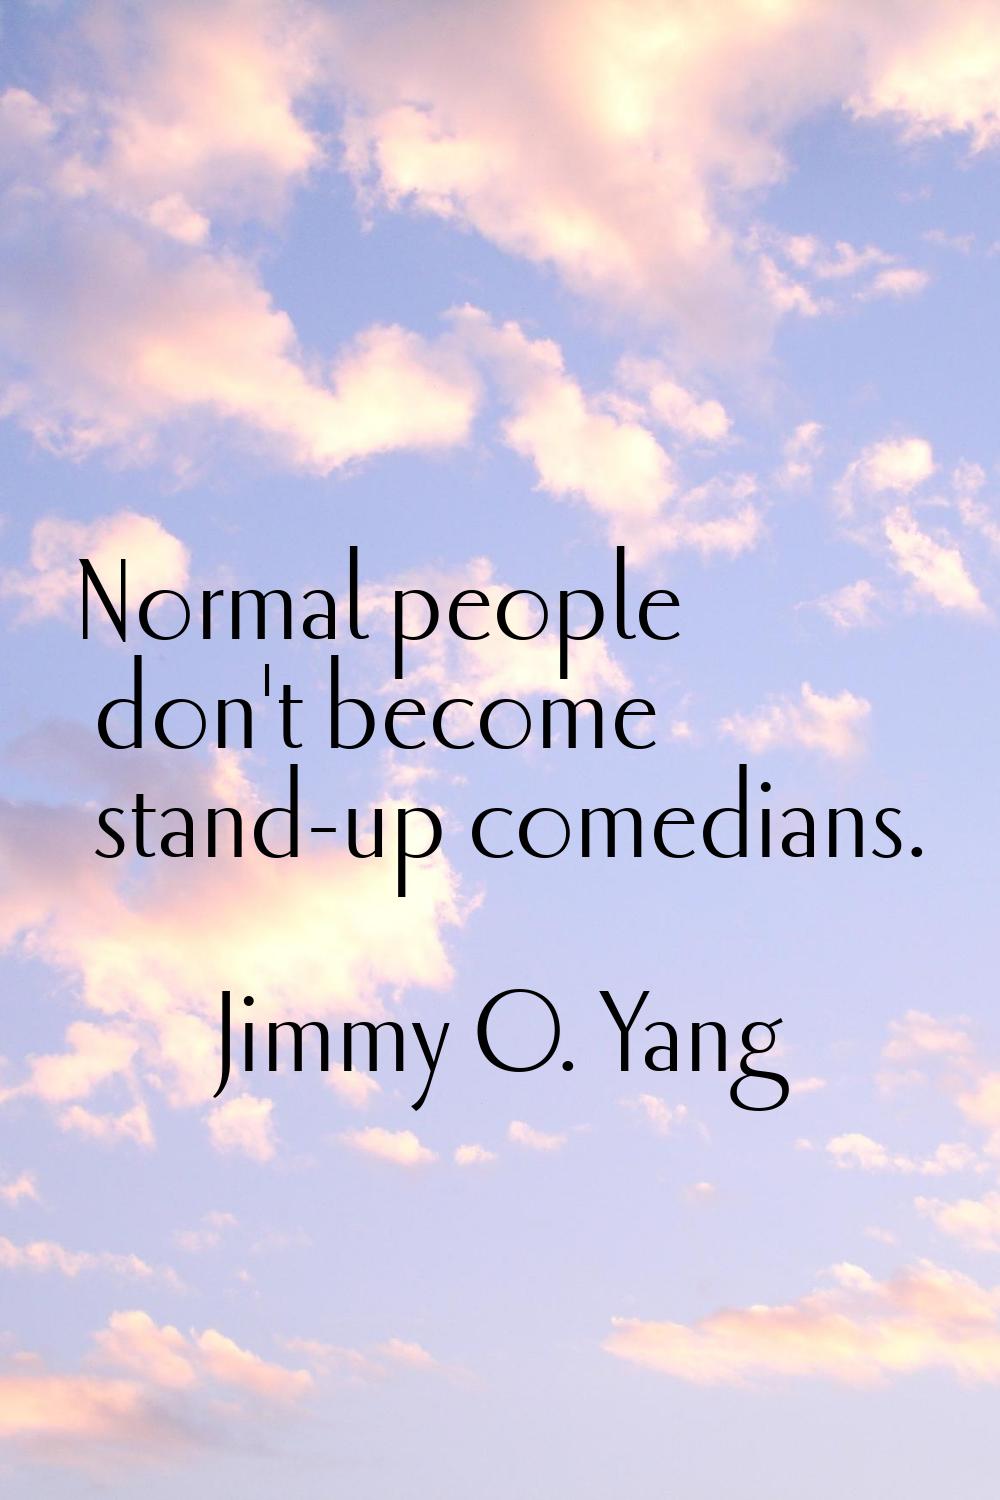 Normal people don't become stand-up comedians.